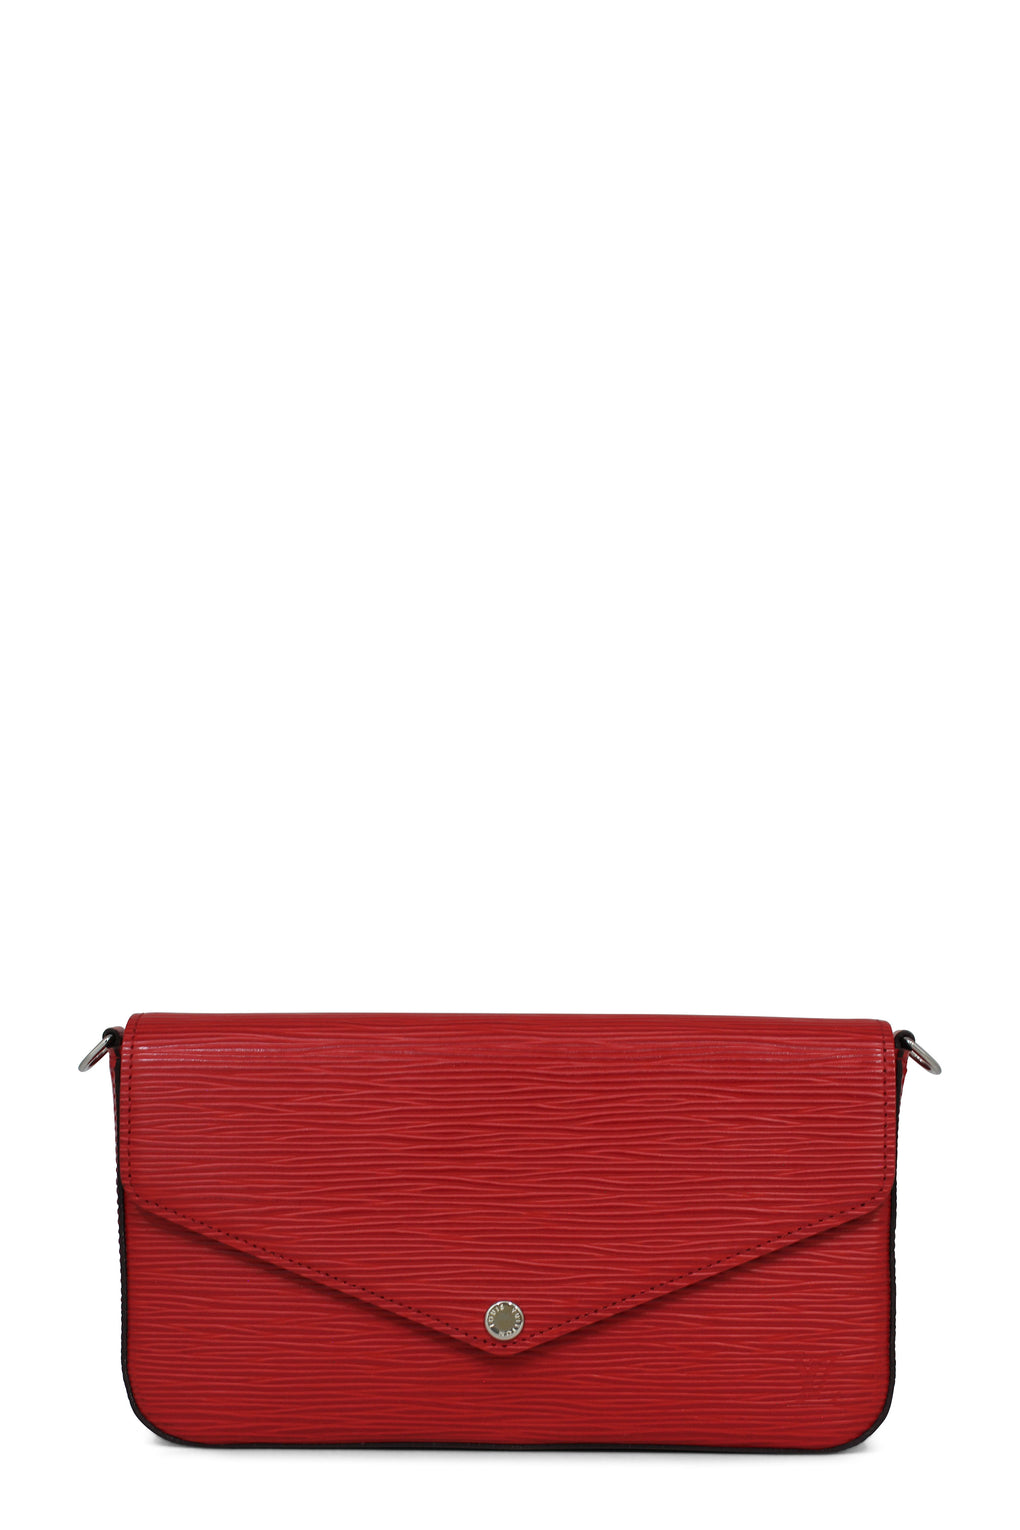 Louis Vuitton Epi Pochette Felicie Red – Shop at Style Theory